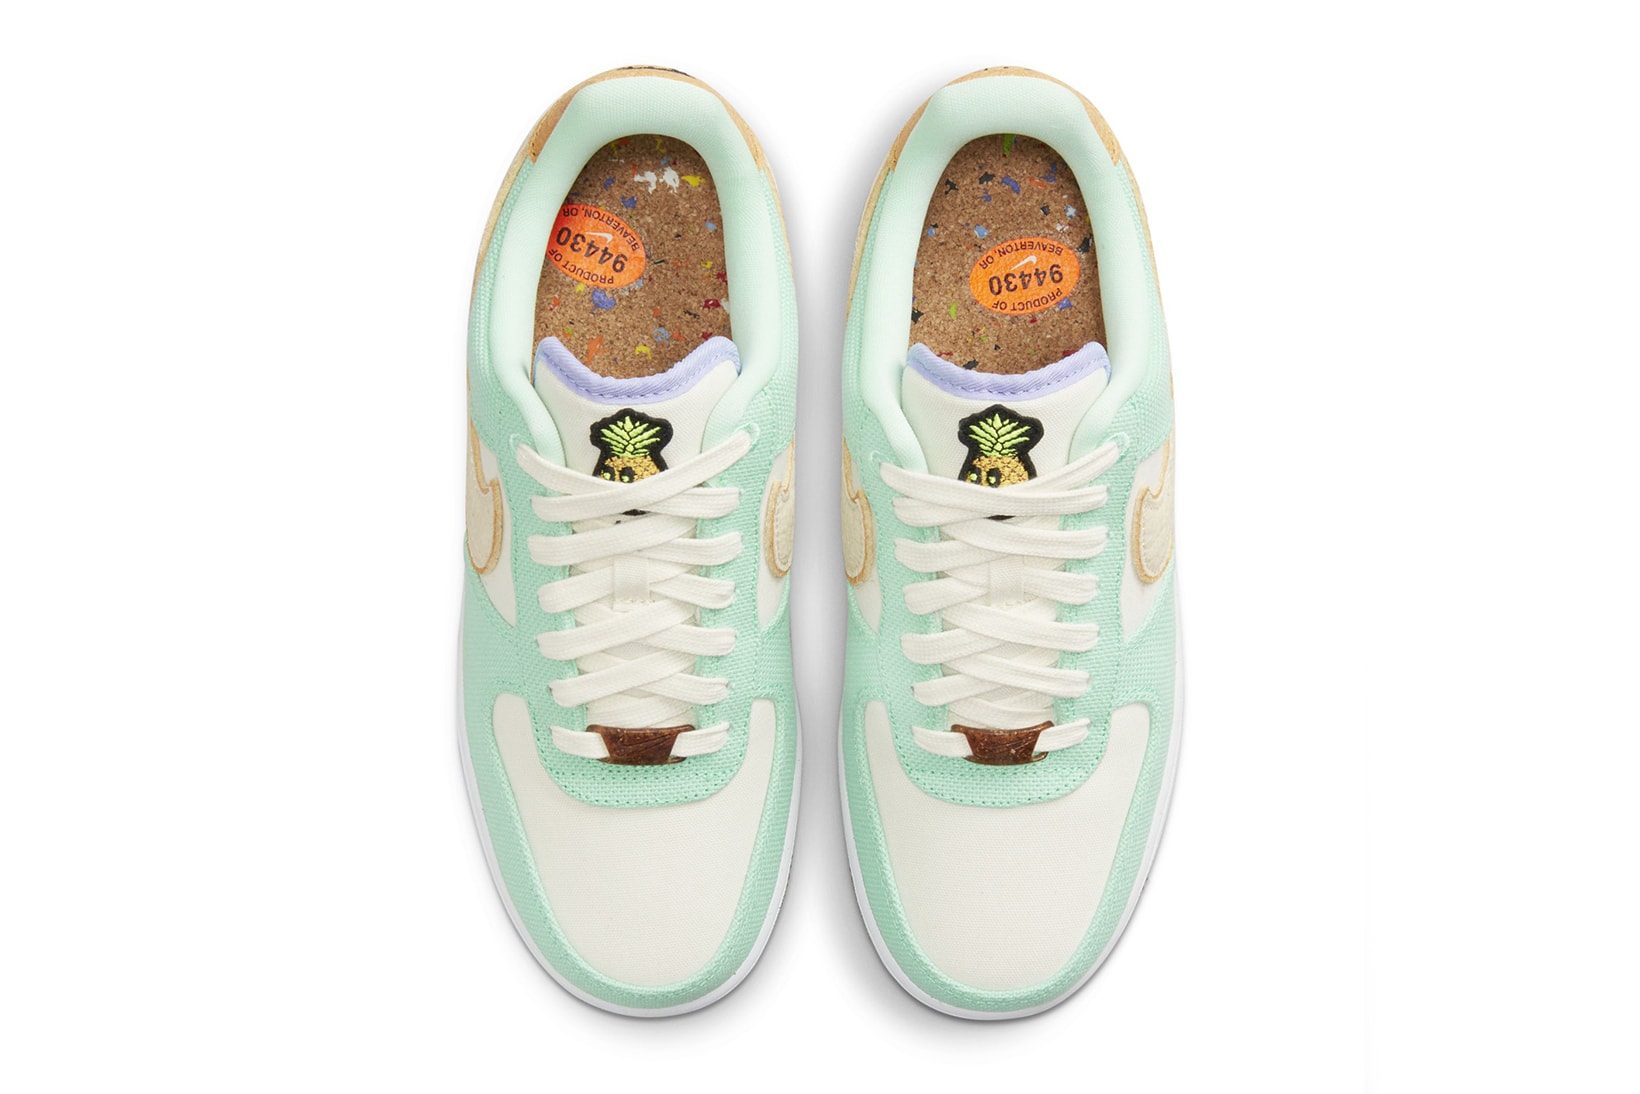 Nike Air Force 1 AF1 Pineapple Canvas Sneakers Shoes Kicks Footwear Teal Blue White Brown Top View Aerial Insole